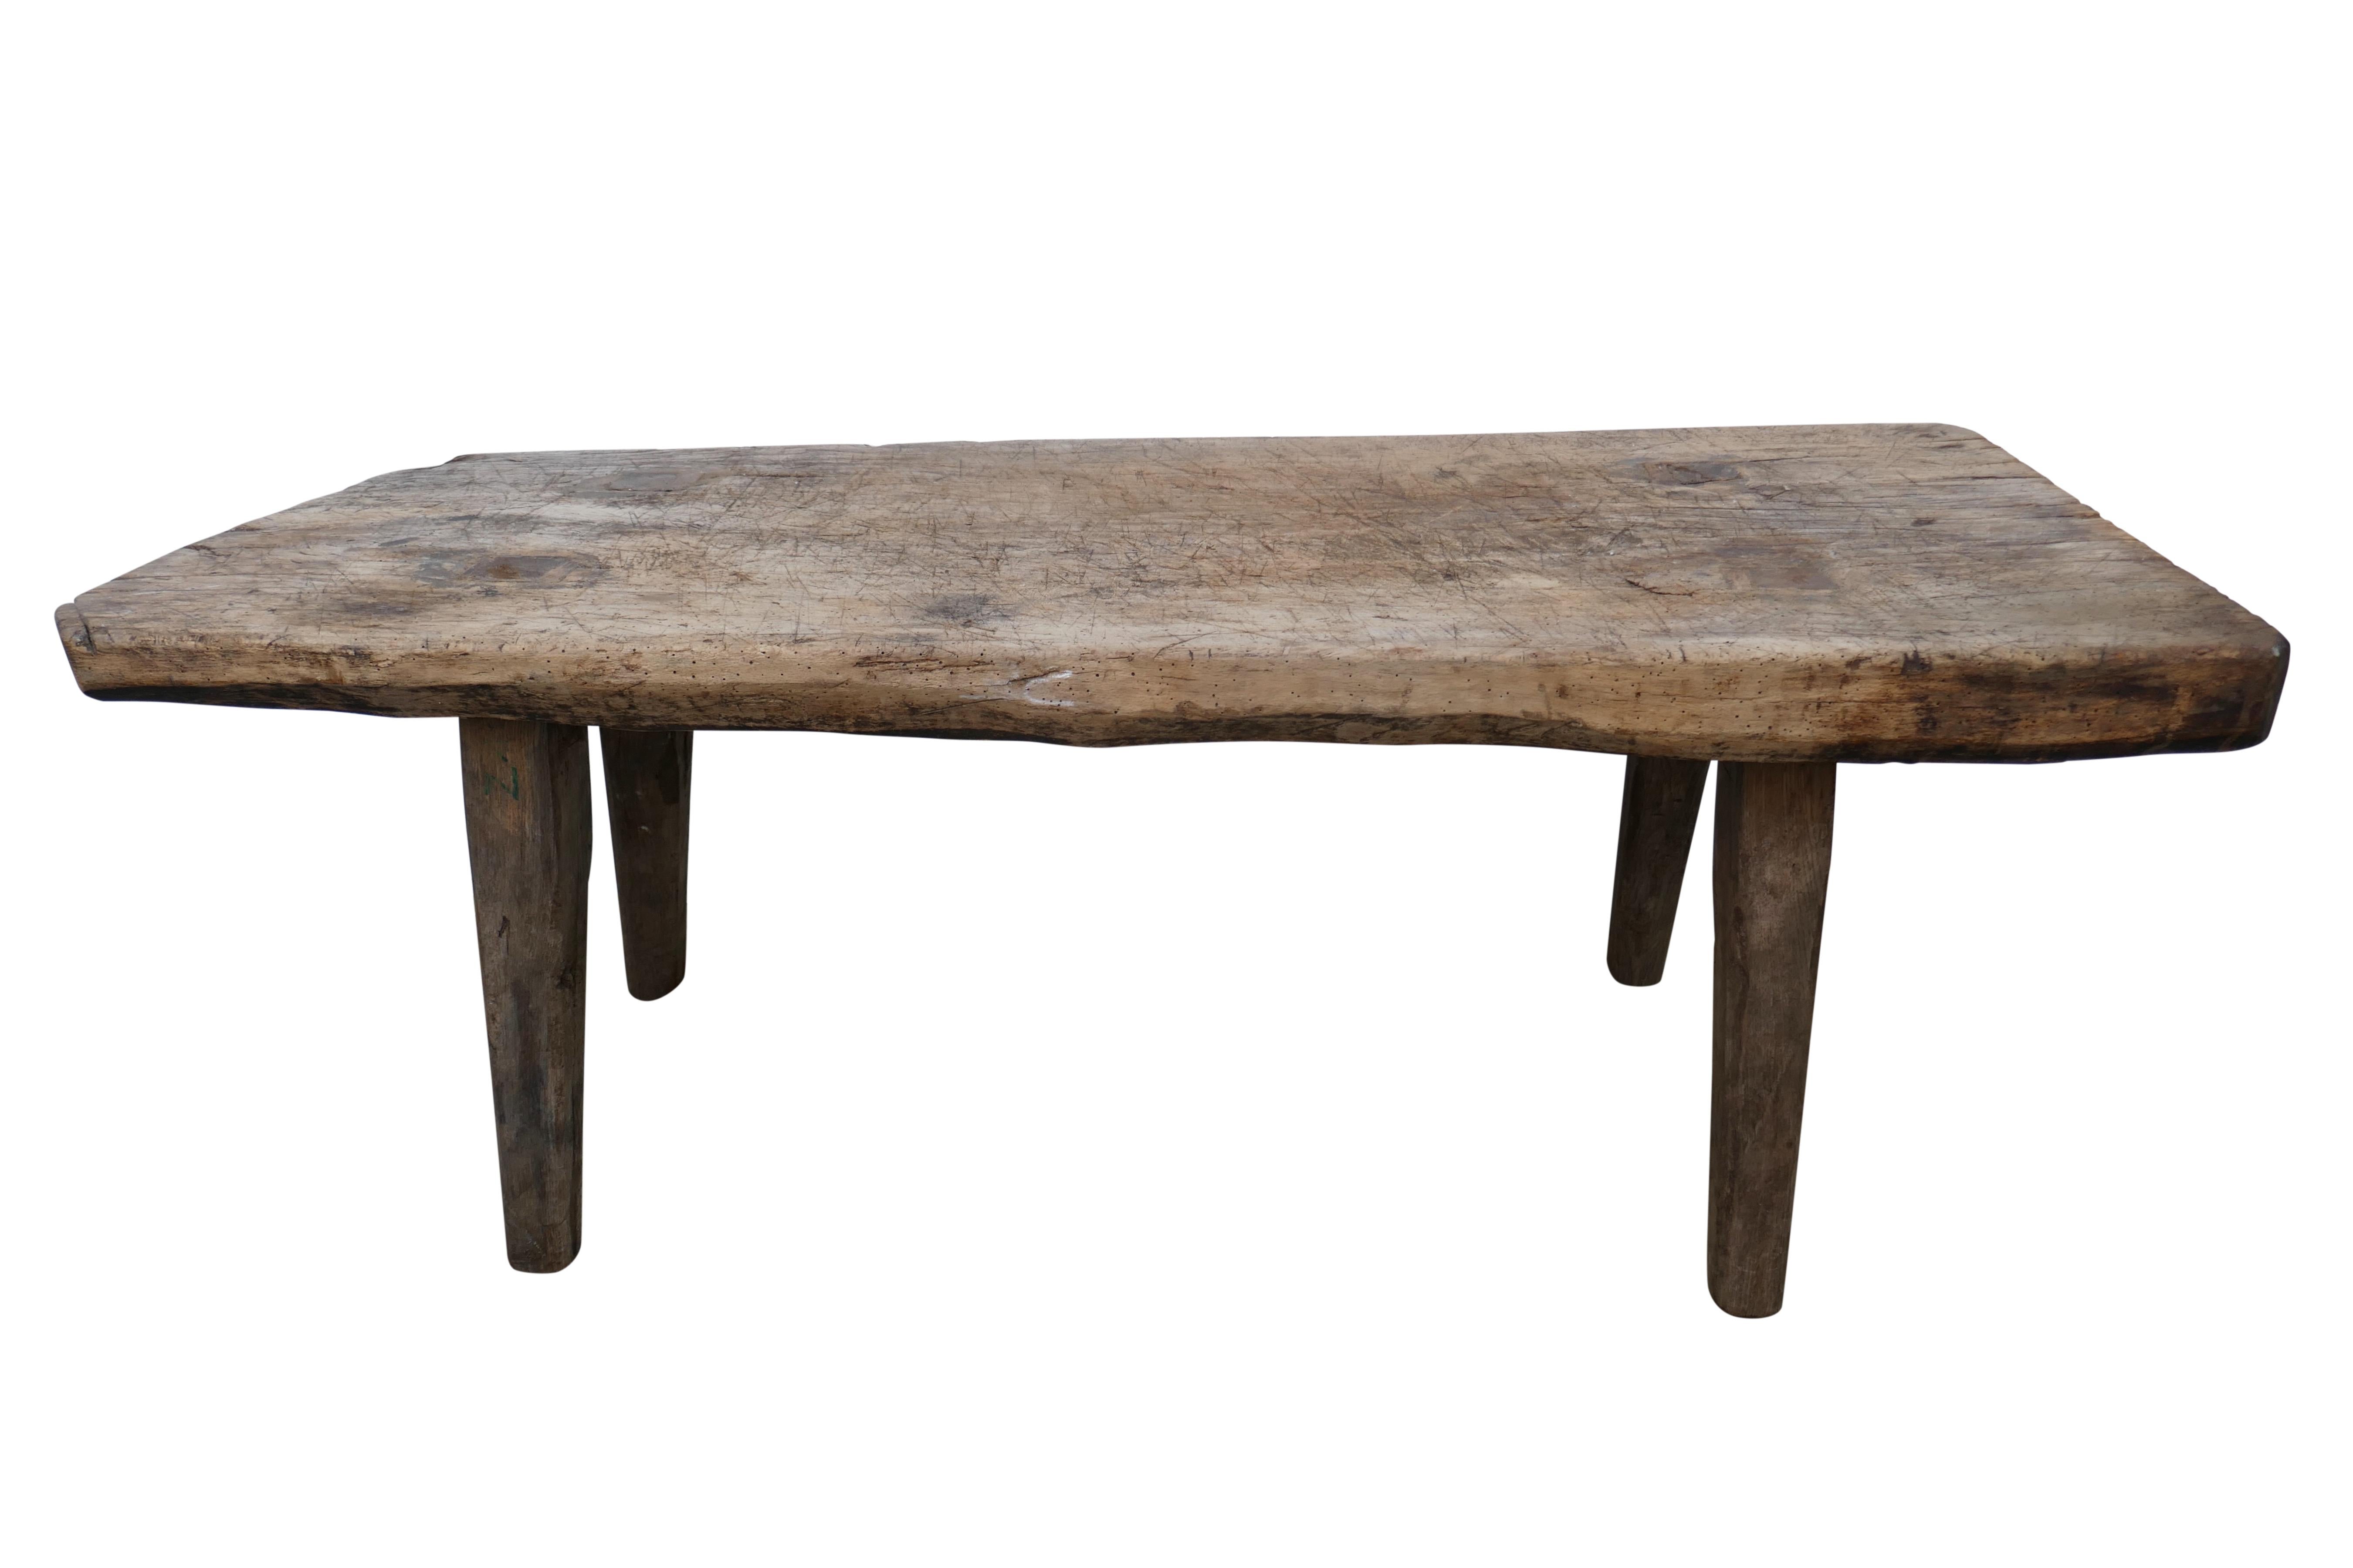 An outstanding example of a Hungarian vintage rustic table. Primitively hand-crafted and carved of solid heavy-weight oak featuring beautiful time created age character and patina throughout. This particular piece is extremely solid with chunky 3